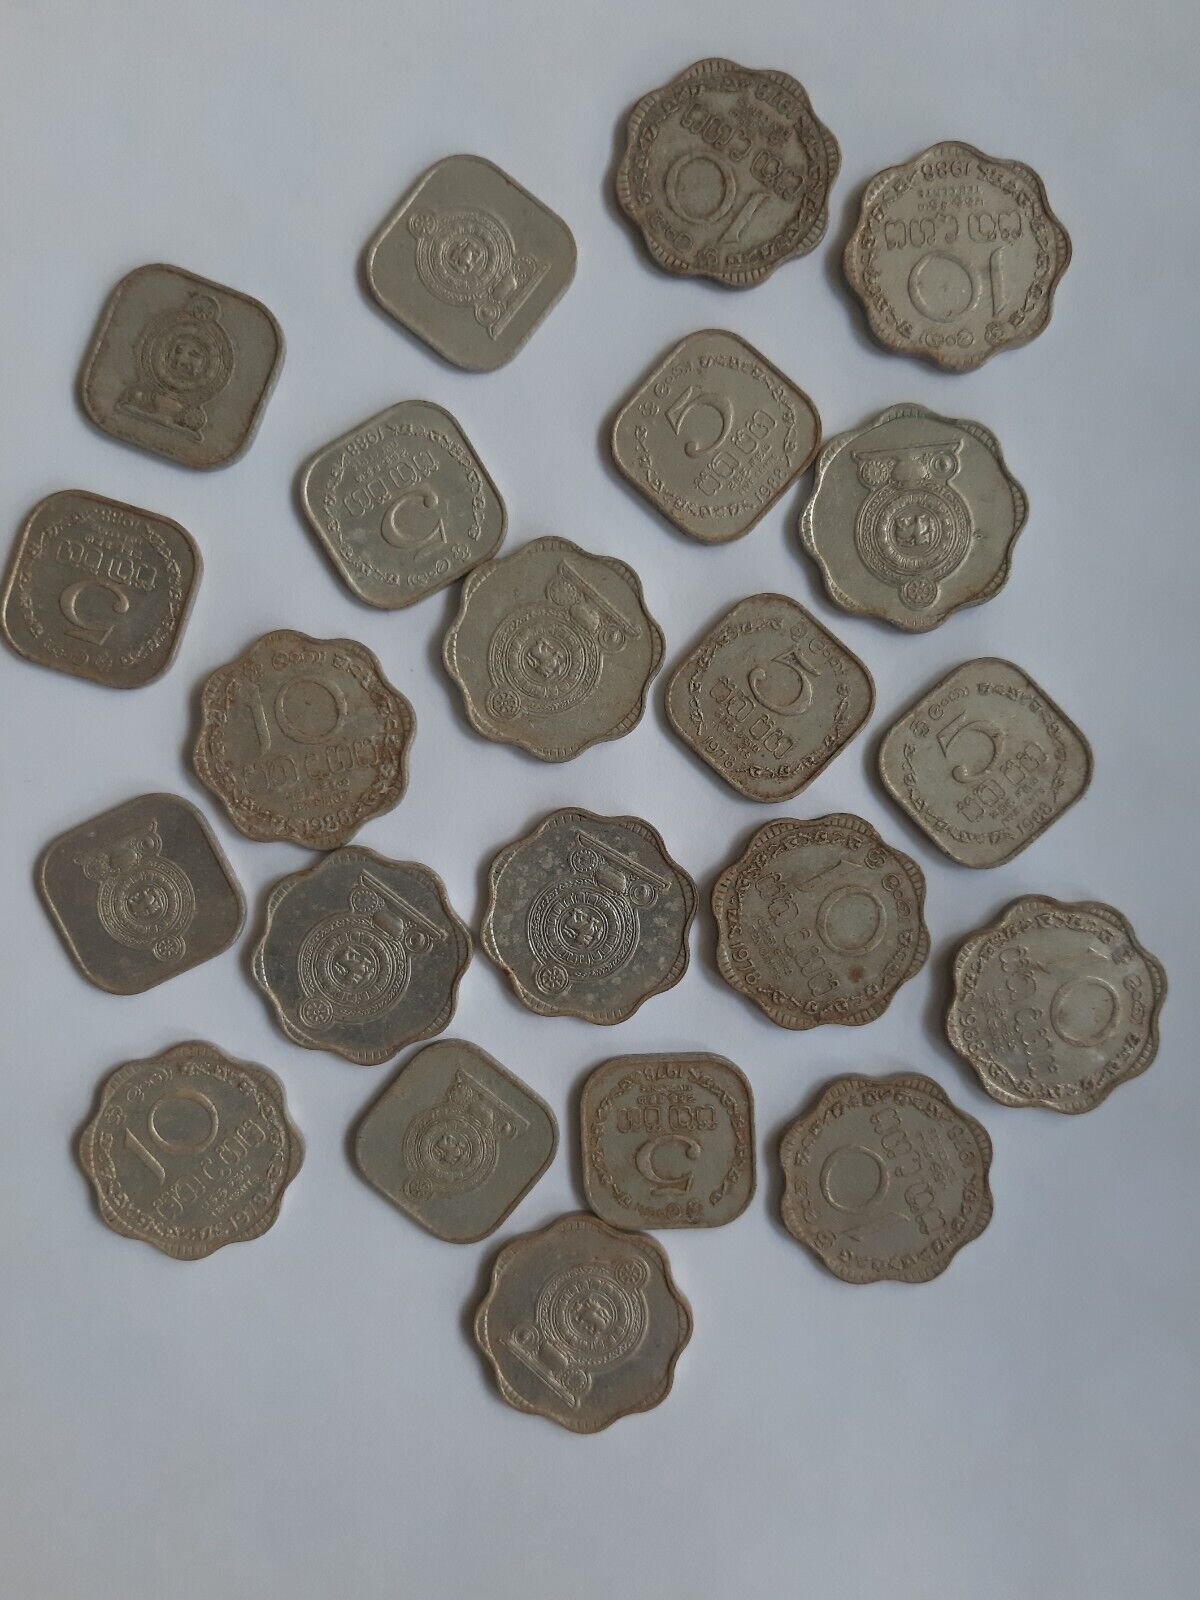 SRI LANKAN COINS. SOUTH ASIA ISLAND. OLD COLLECTIBLE MONEY RUPEES 10 CENTS Без бренда - фотография #3